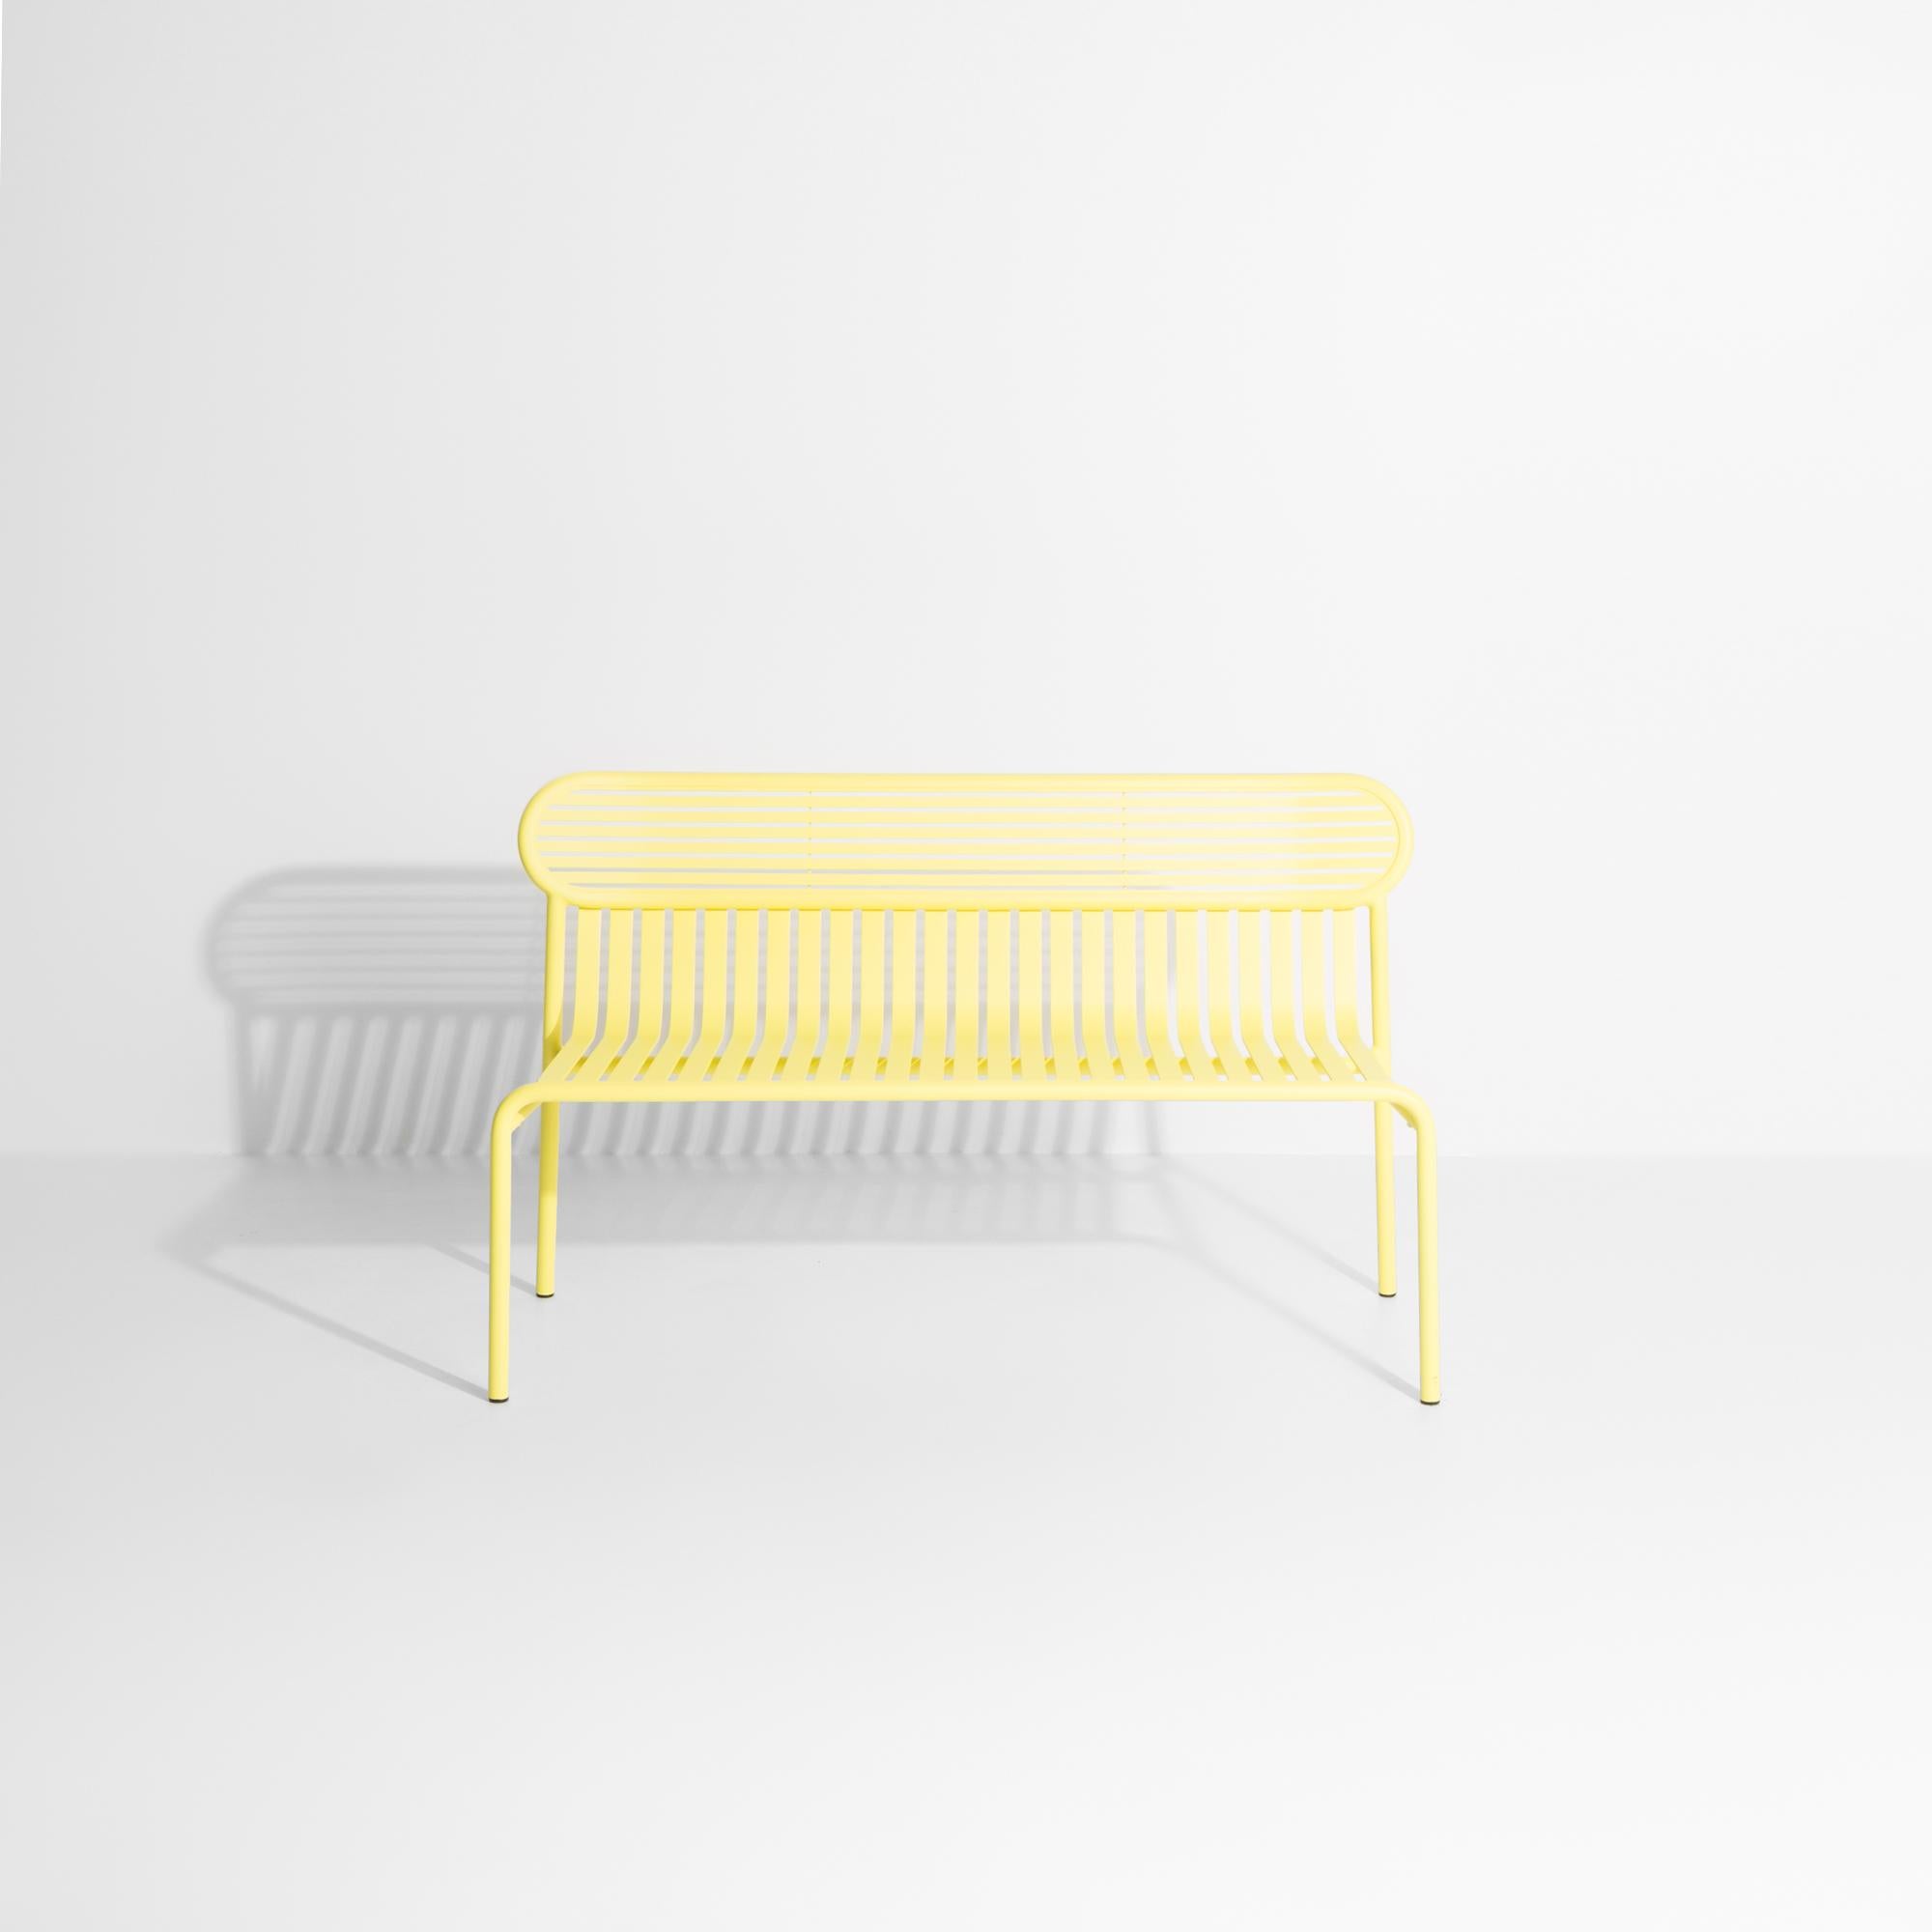 Petite Friture Week-End Bench in Yellow Aluminium by Studio BrichetZiegler In New Condition For Sale In Brooklyn, NY